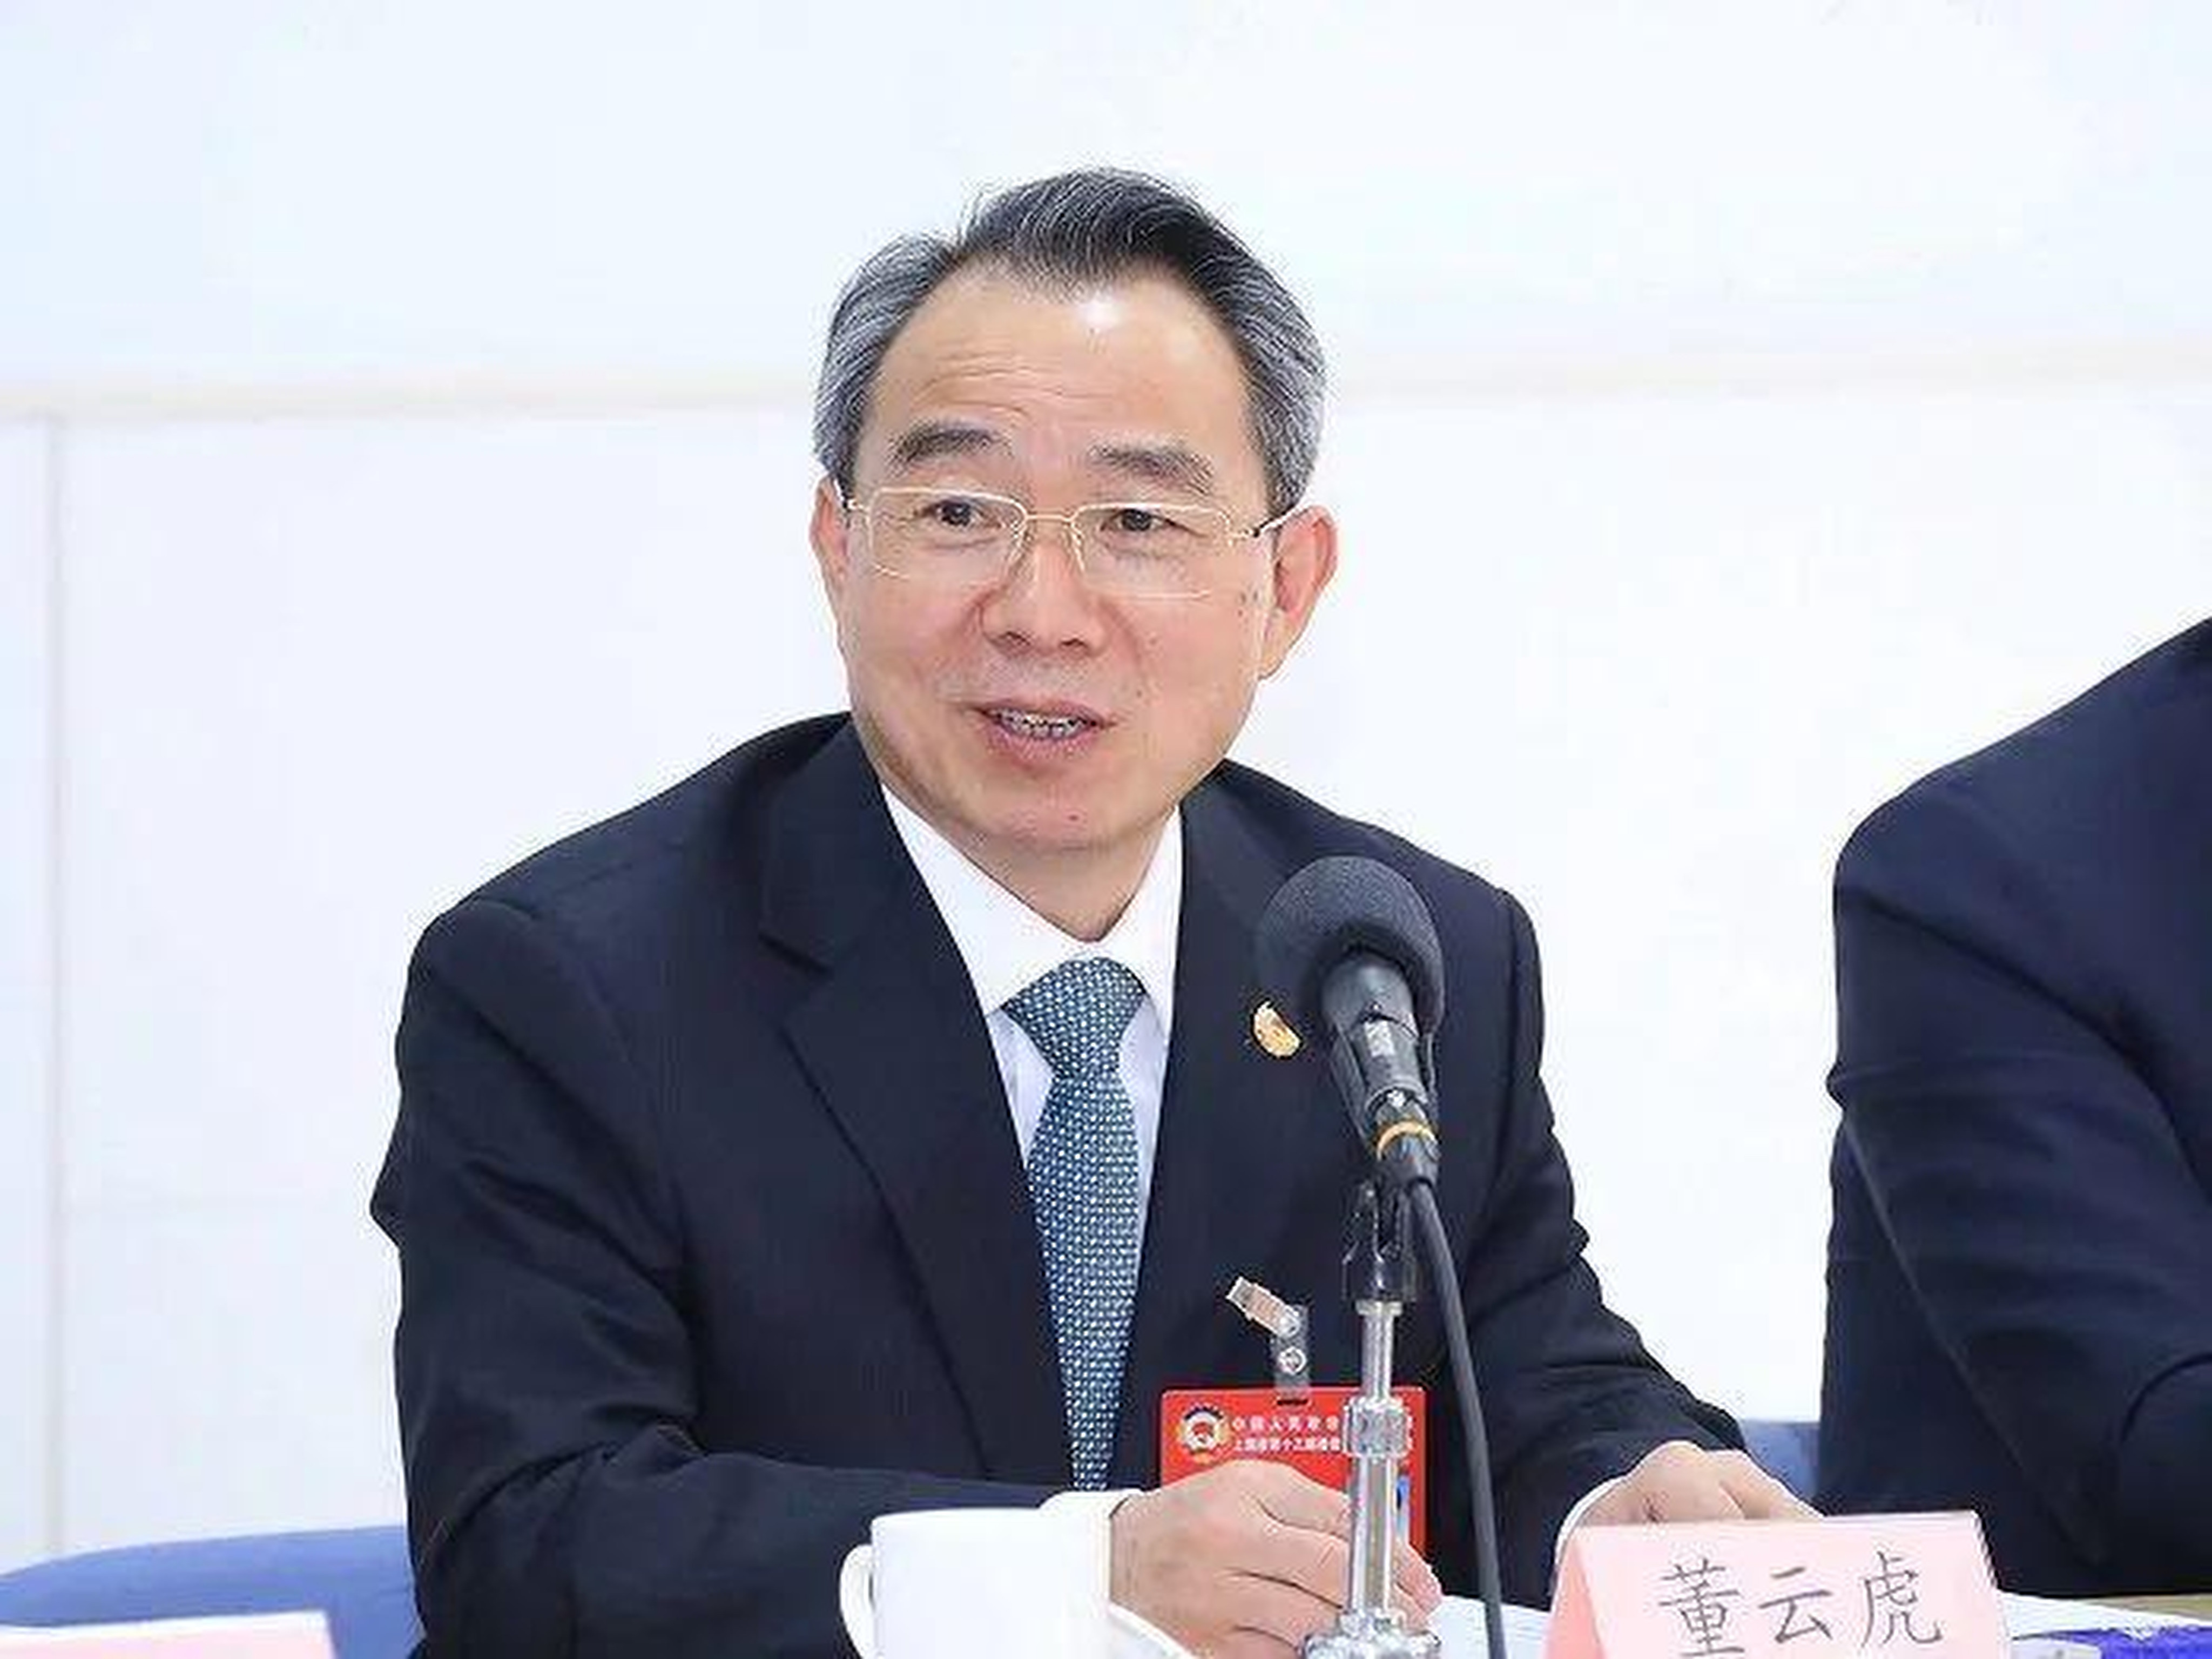 Dong Yunhu, who was appointed head of Shanghai’s lawmaking body in January, is being investigated by the Central Commission for Discipline Inspection. Photo: Weibo